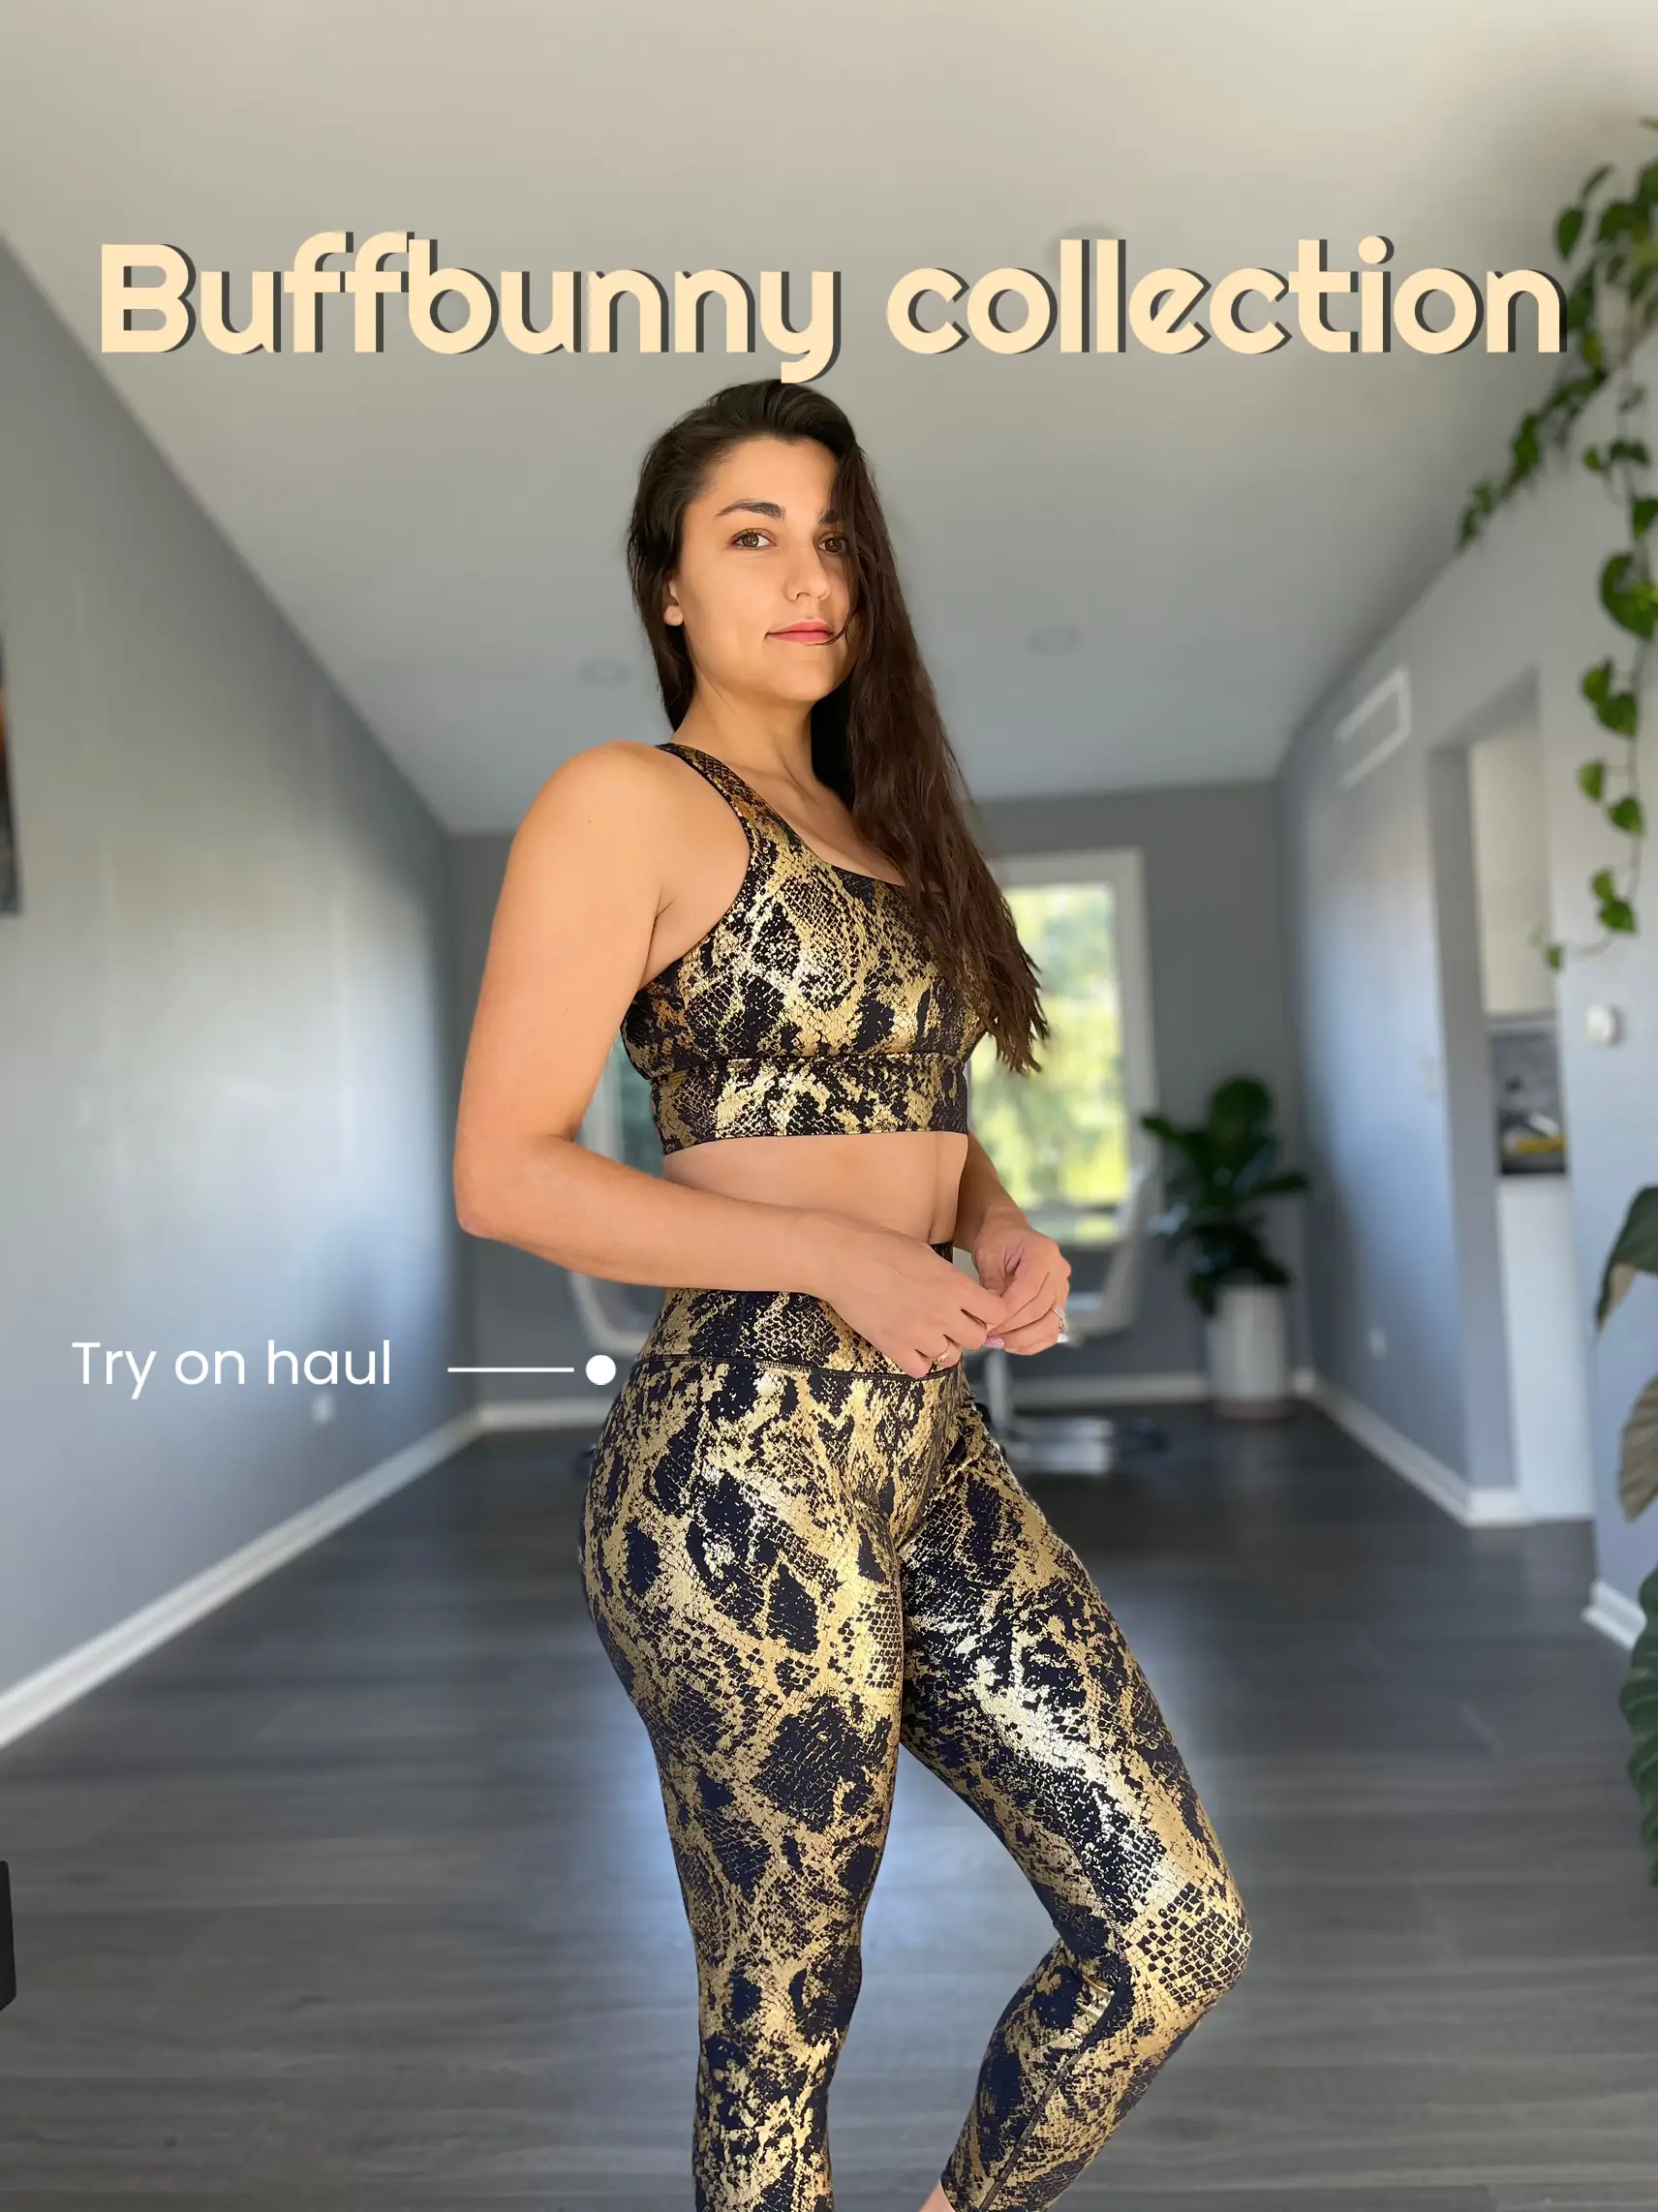 NEW Buffbunny Collection SHORTS, leggings, and MORE